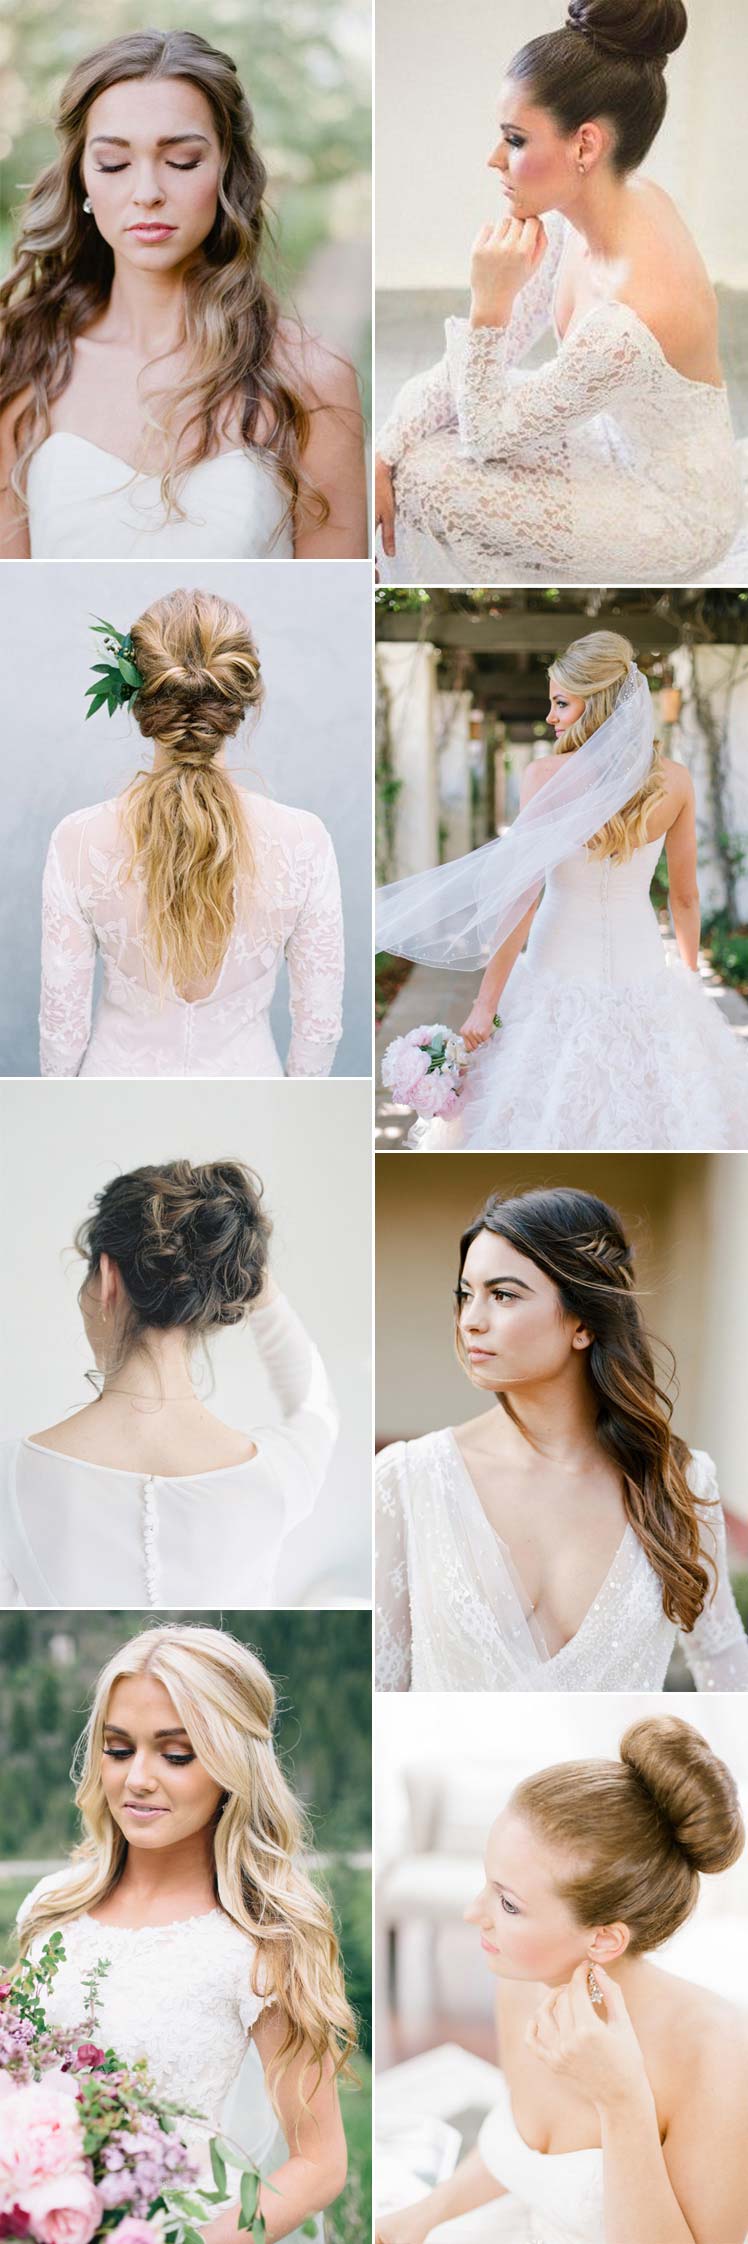 Beautiful bridal hairstyle inspiration for your wedding day